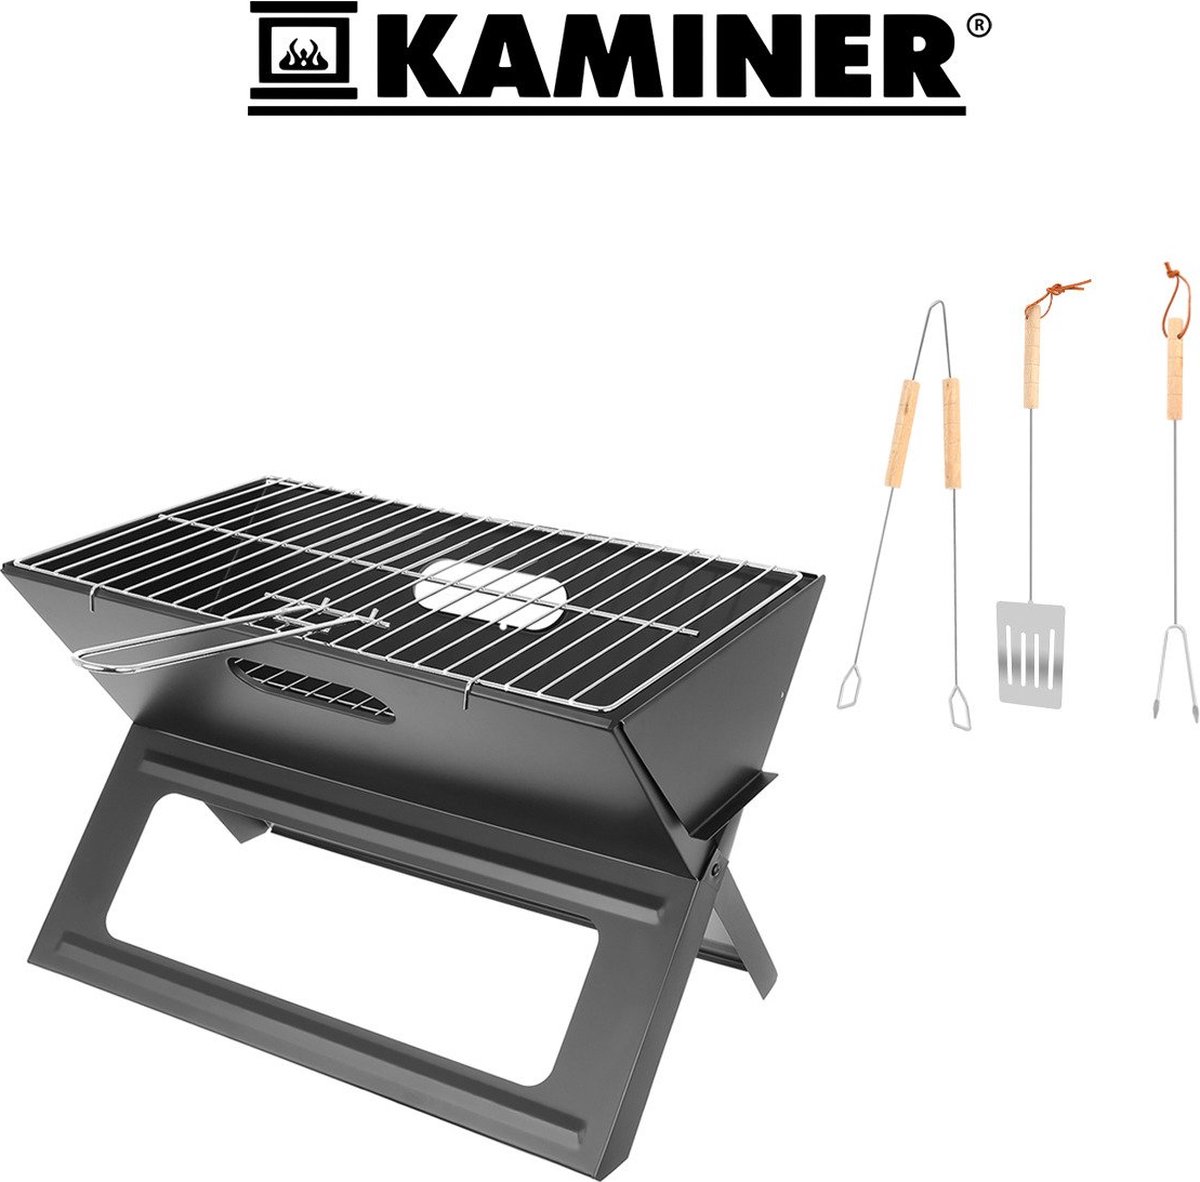 Kaminer - Draagbare Opvouwbare Tuin BBQ - RVS - Compact - GRATIS Accessoires - 3 Kg